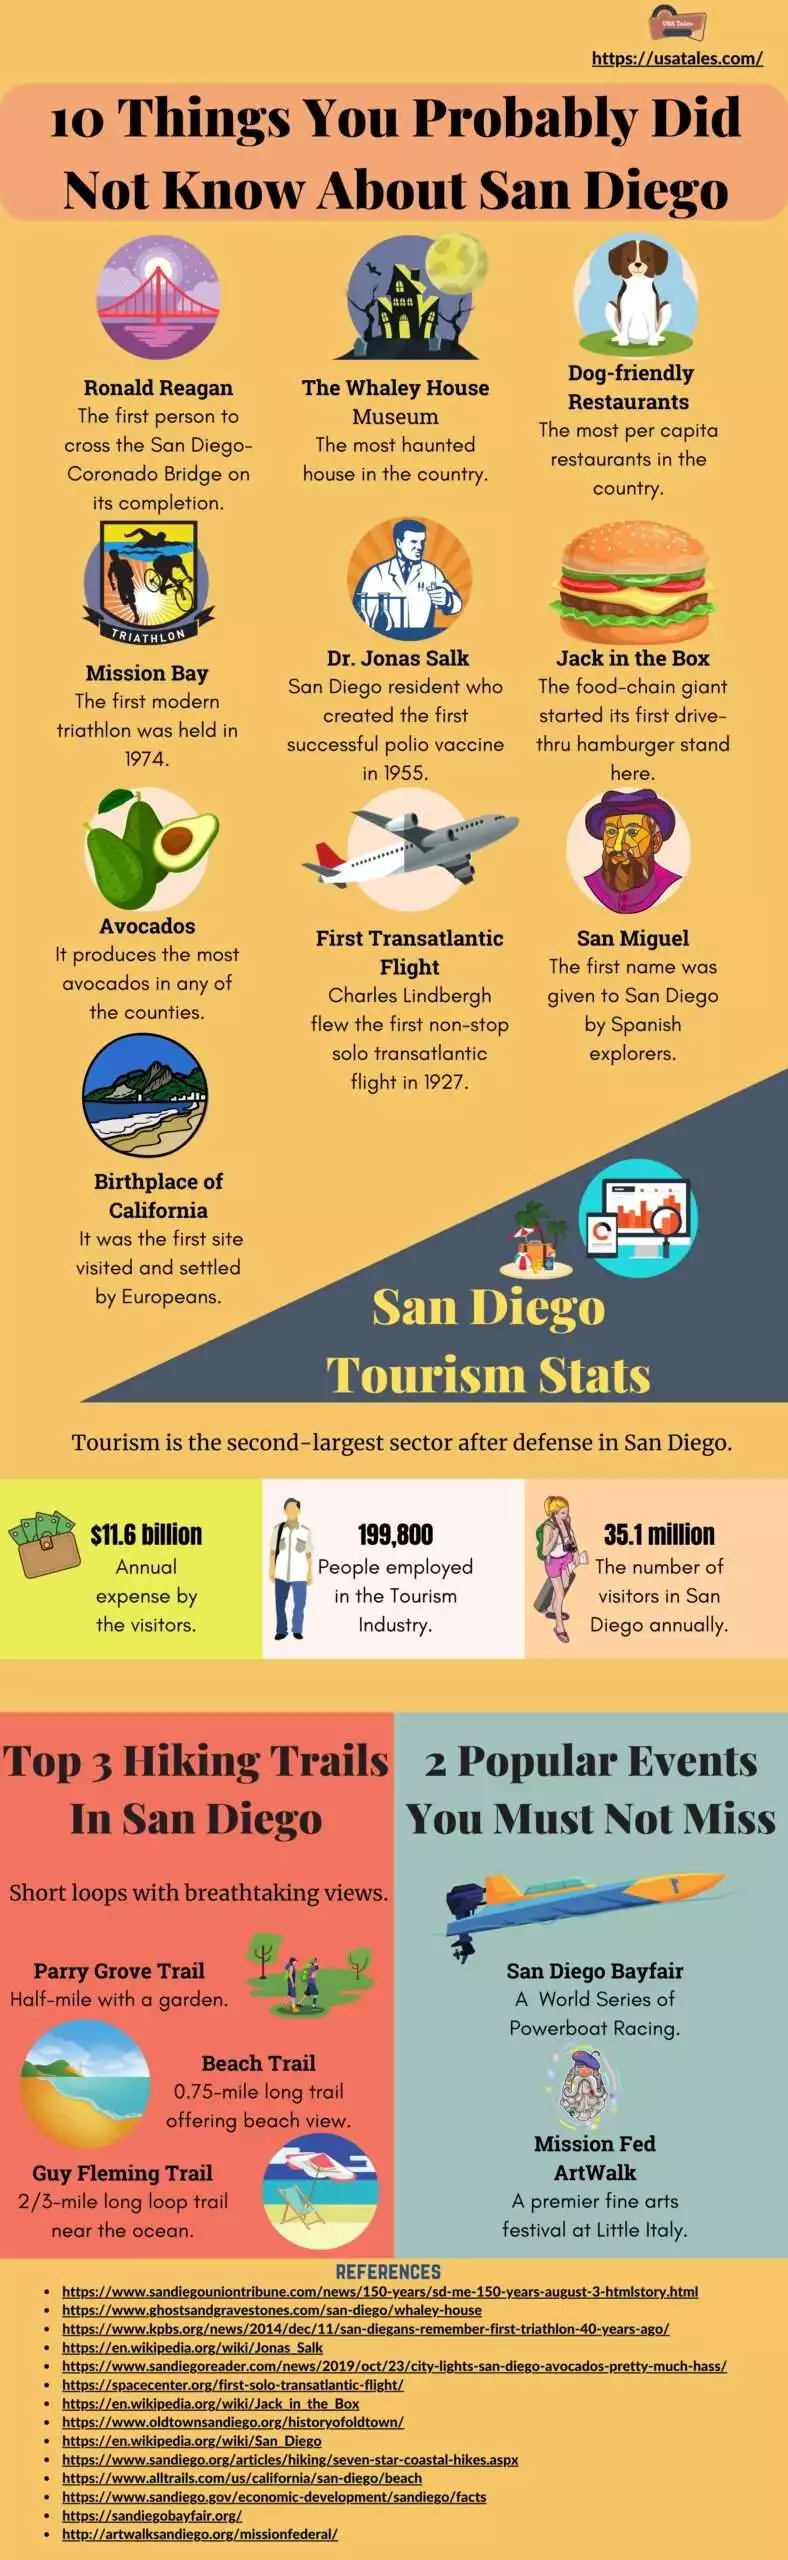 10 Things You Probably Did Not Know About San Diego